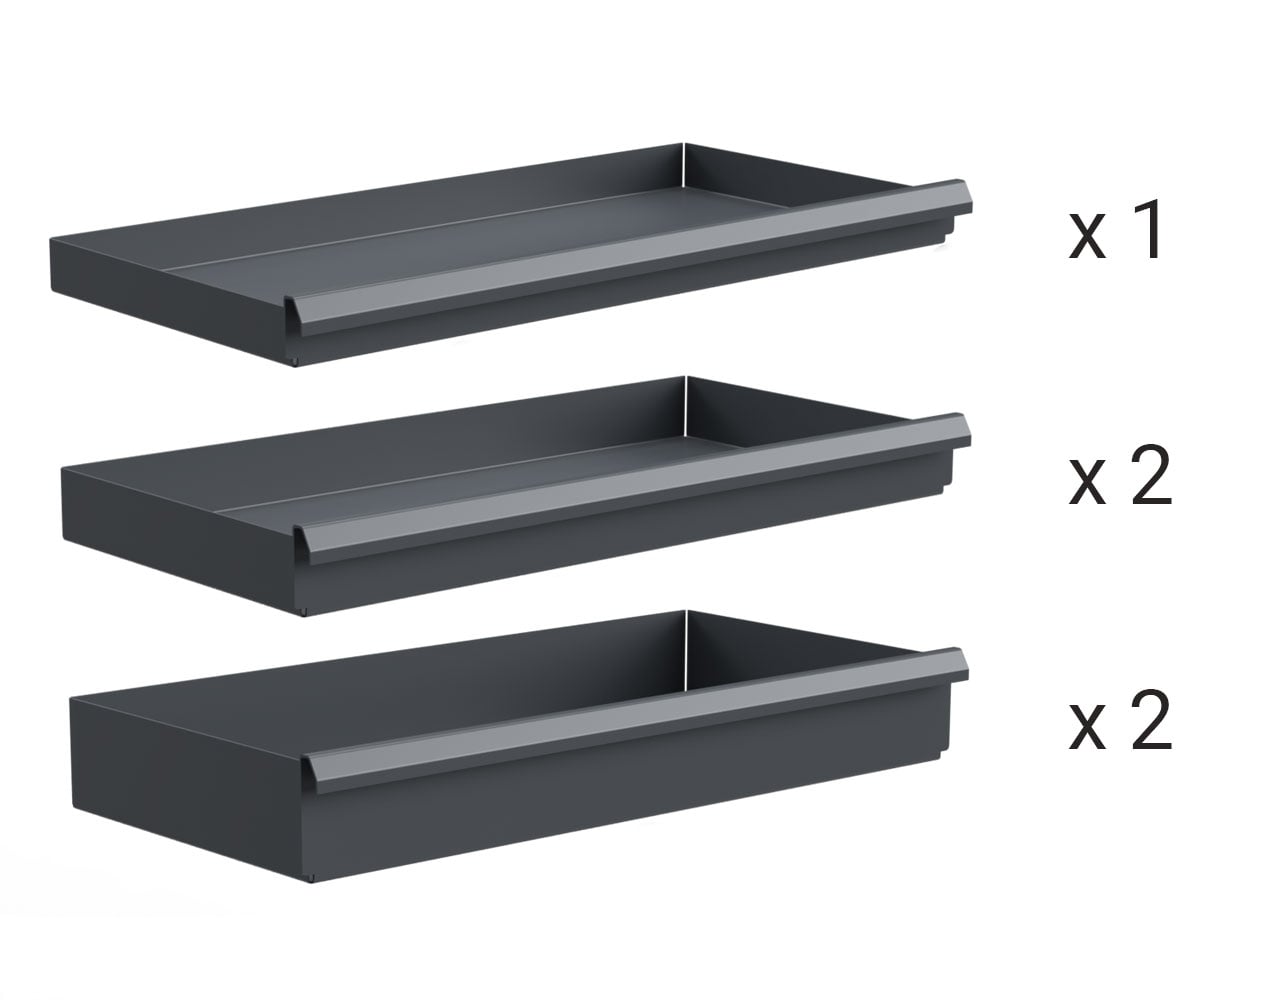 Extra Heavy Duty Drawer Kit with (1) 3 in. (2) 4 in. (2) 6 in. Drawers for 48 in. W x 24 in. D Cabinet